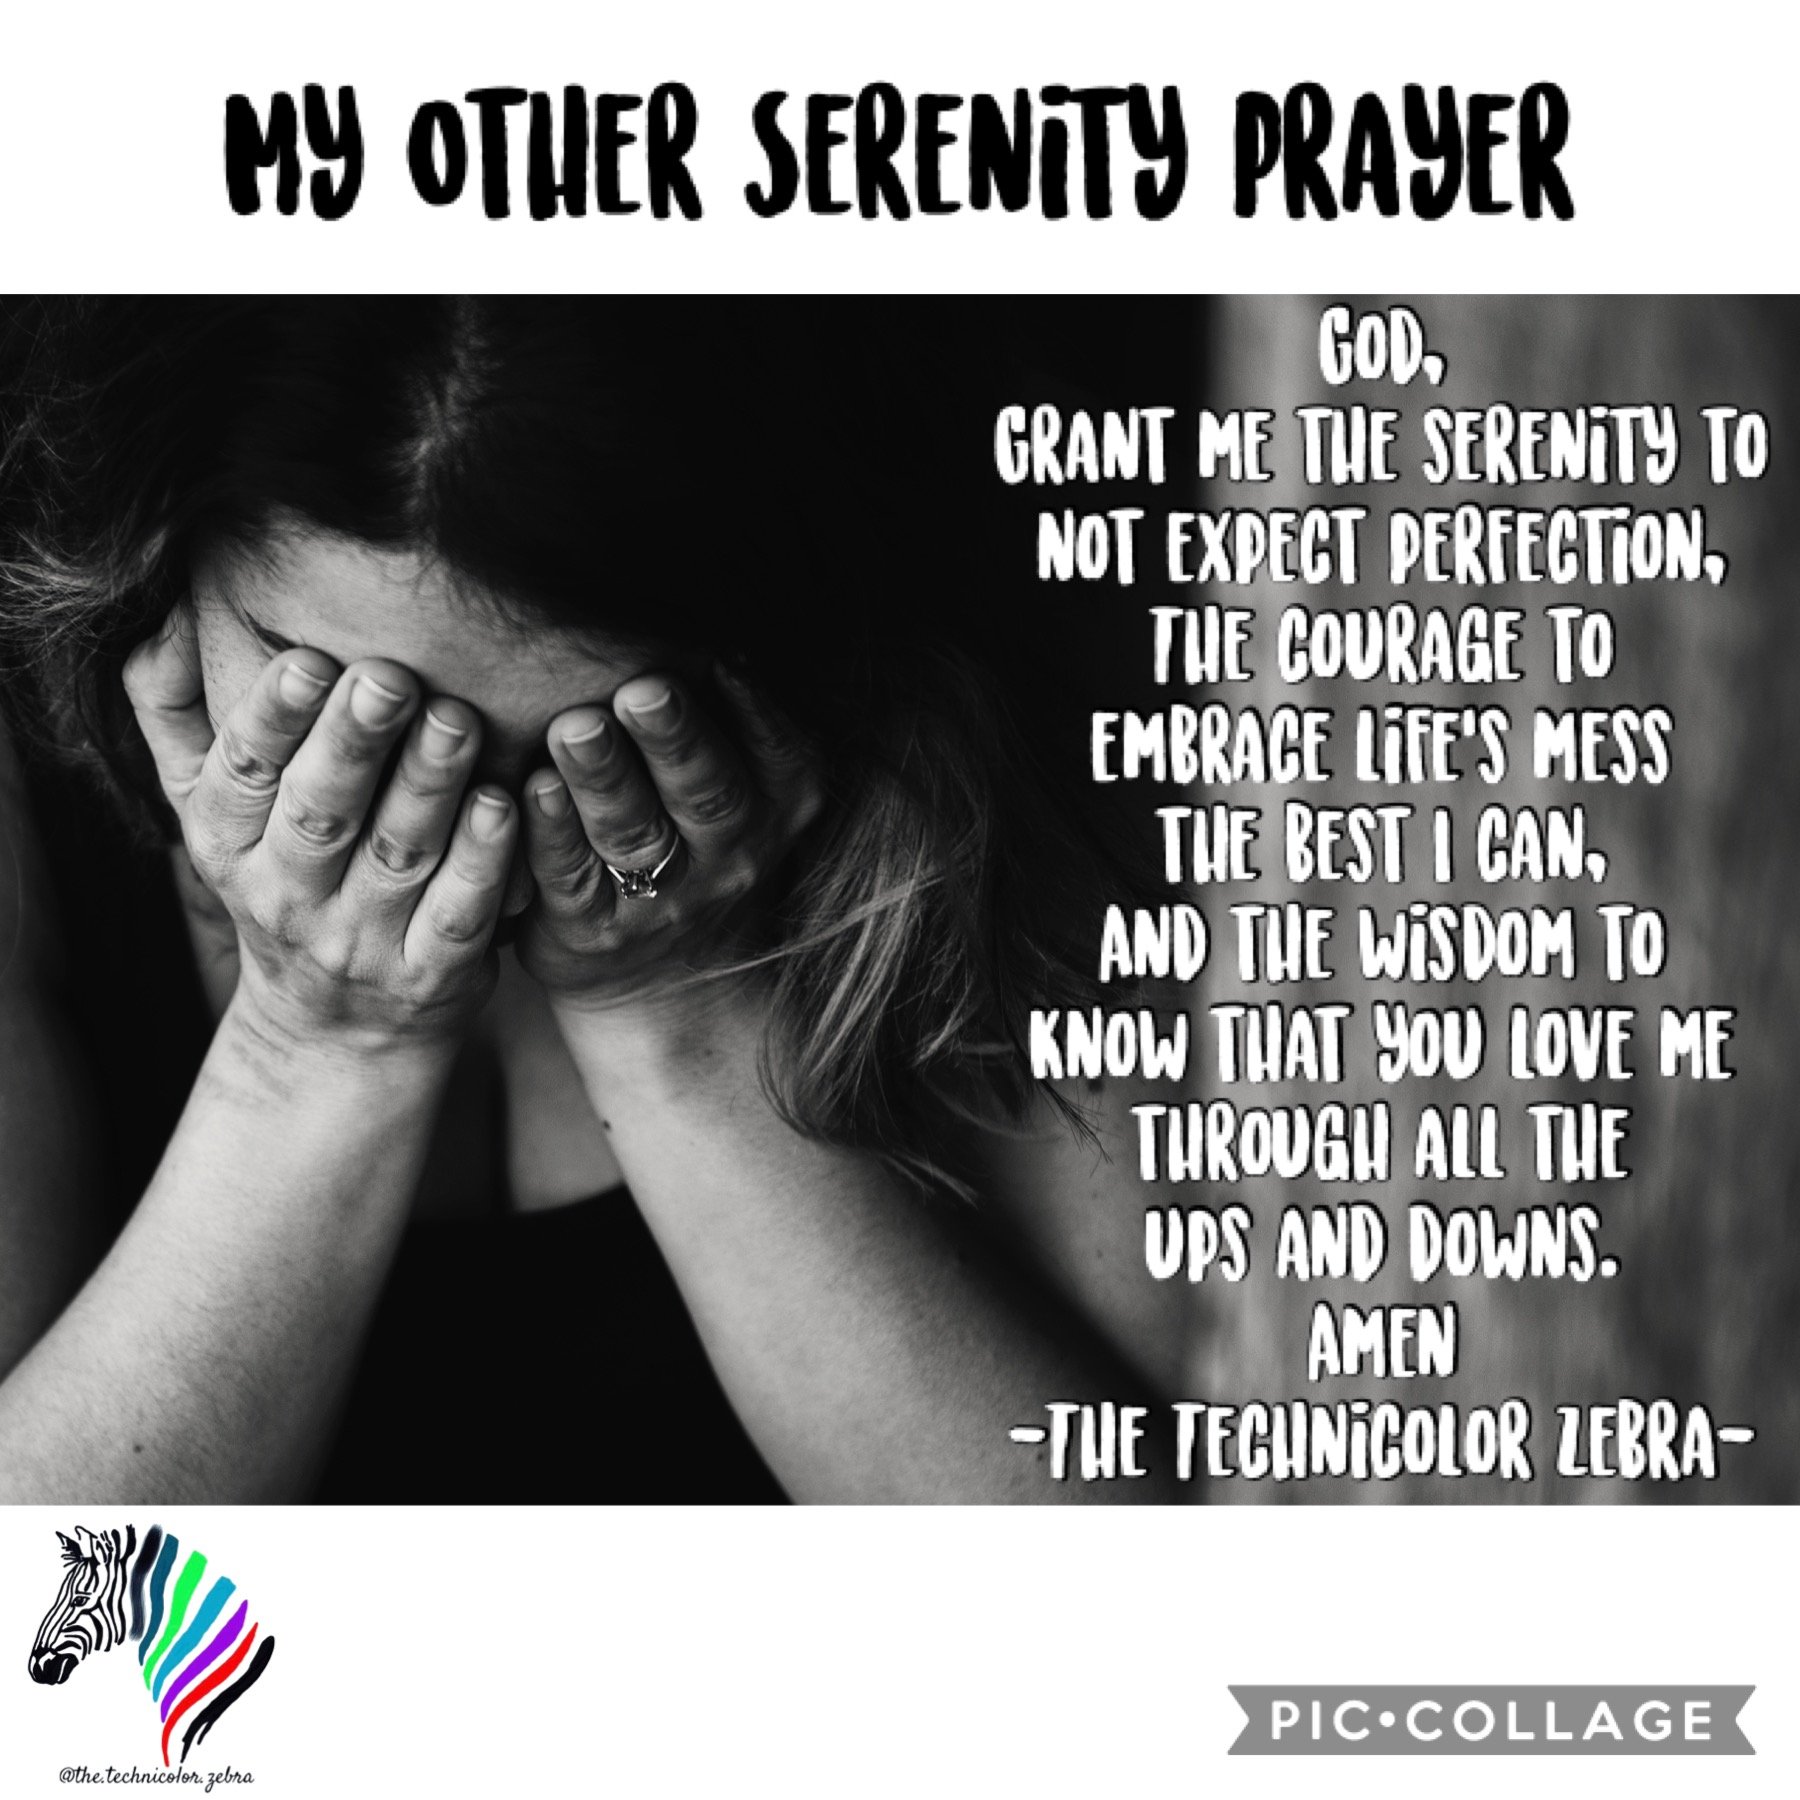 A Girl Covers Her Face With Her Hand, Beside Her Photo is an Alternate Version of the Serenity Prayer